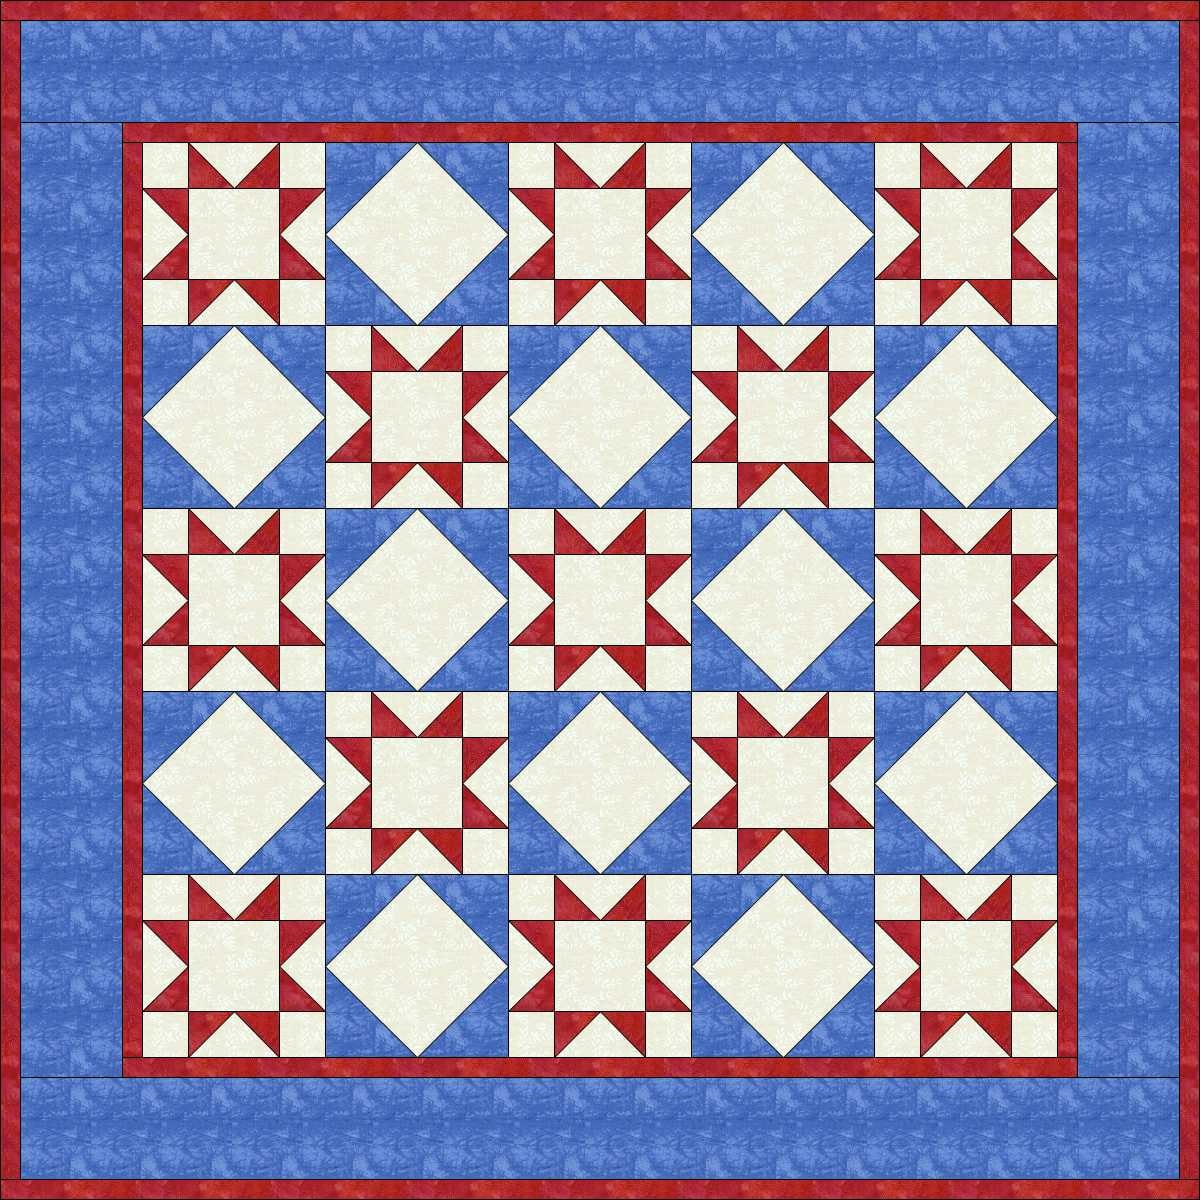 clipart quilts - photo #46